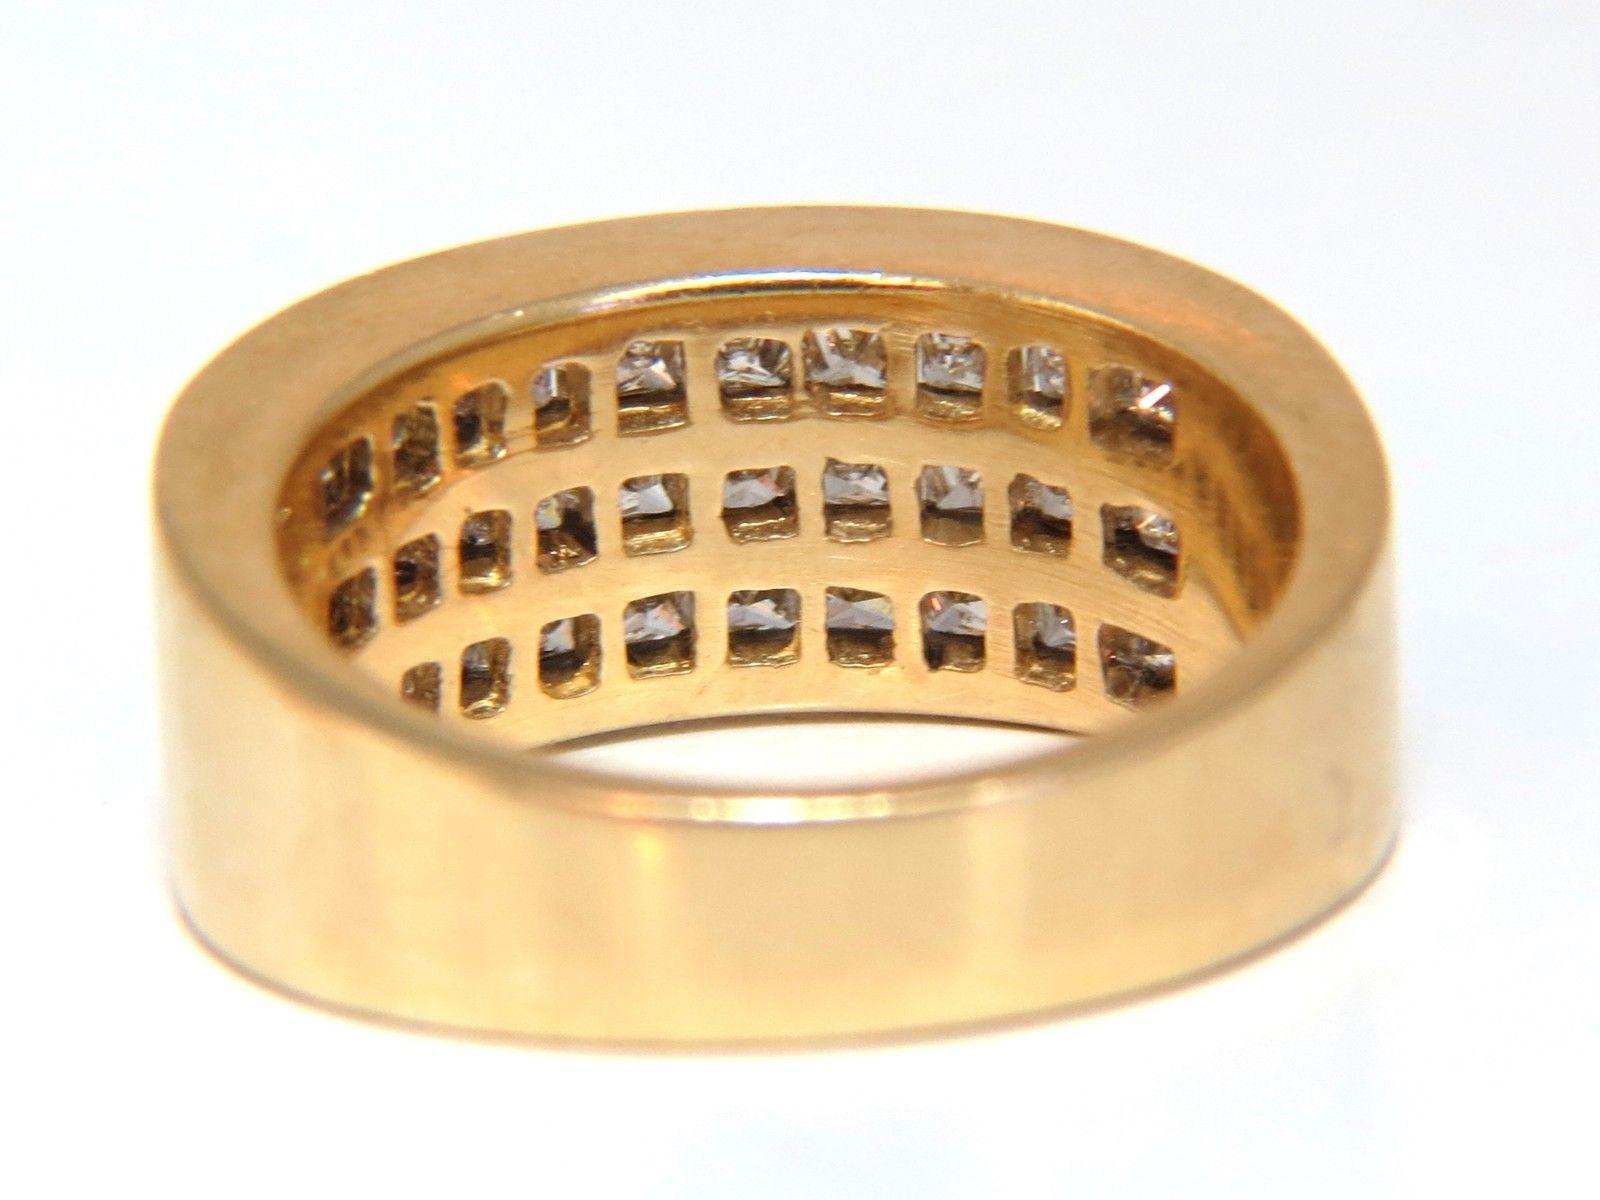 Princess Triple row wide smooth band.

1.86ct. natural princess cuts, channel set.

Vs-2 clarity

H-color

Natural, Earth Mined.

14kt. yellow gold.

7.6 grams.

Ring is 8.4mm wide 

current ring size: 

6.5

We may resize, please inquire

$6000